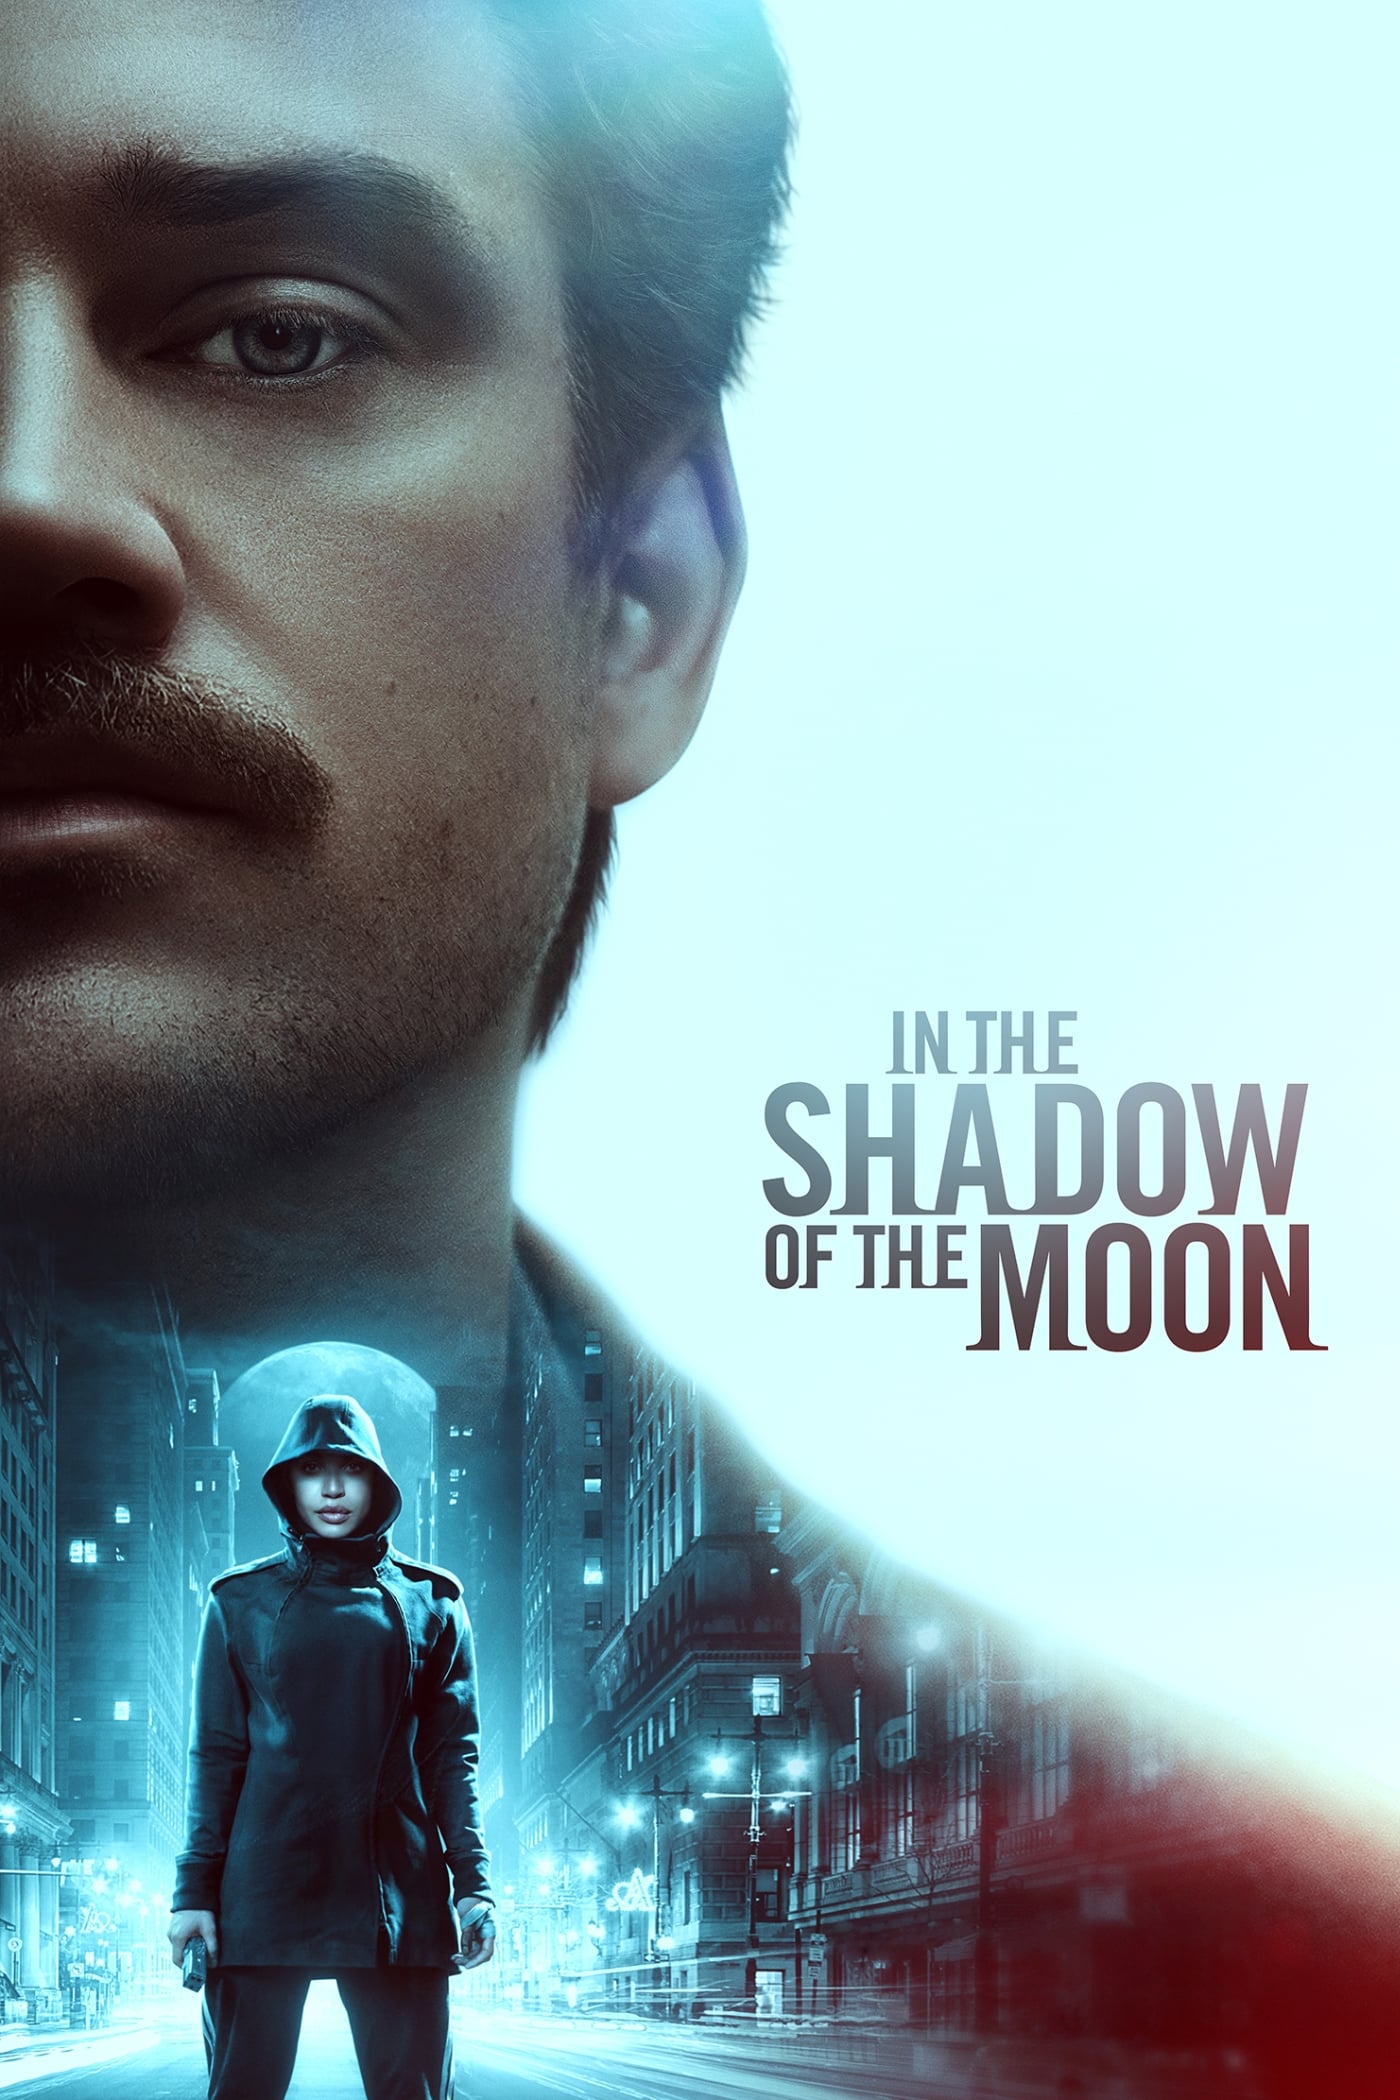 In the Shadow of the Moon (2019) WEB-DL [Hindi (ORG 5.1) + English] 1080p 720p & 480p Dual Audio [x264/HEVC 10bit] | Full Movie